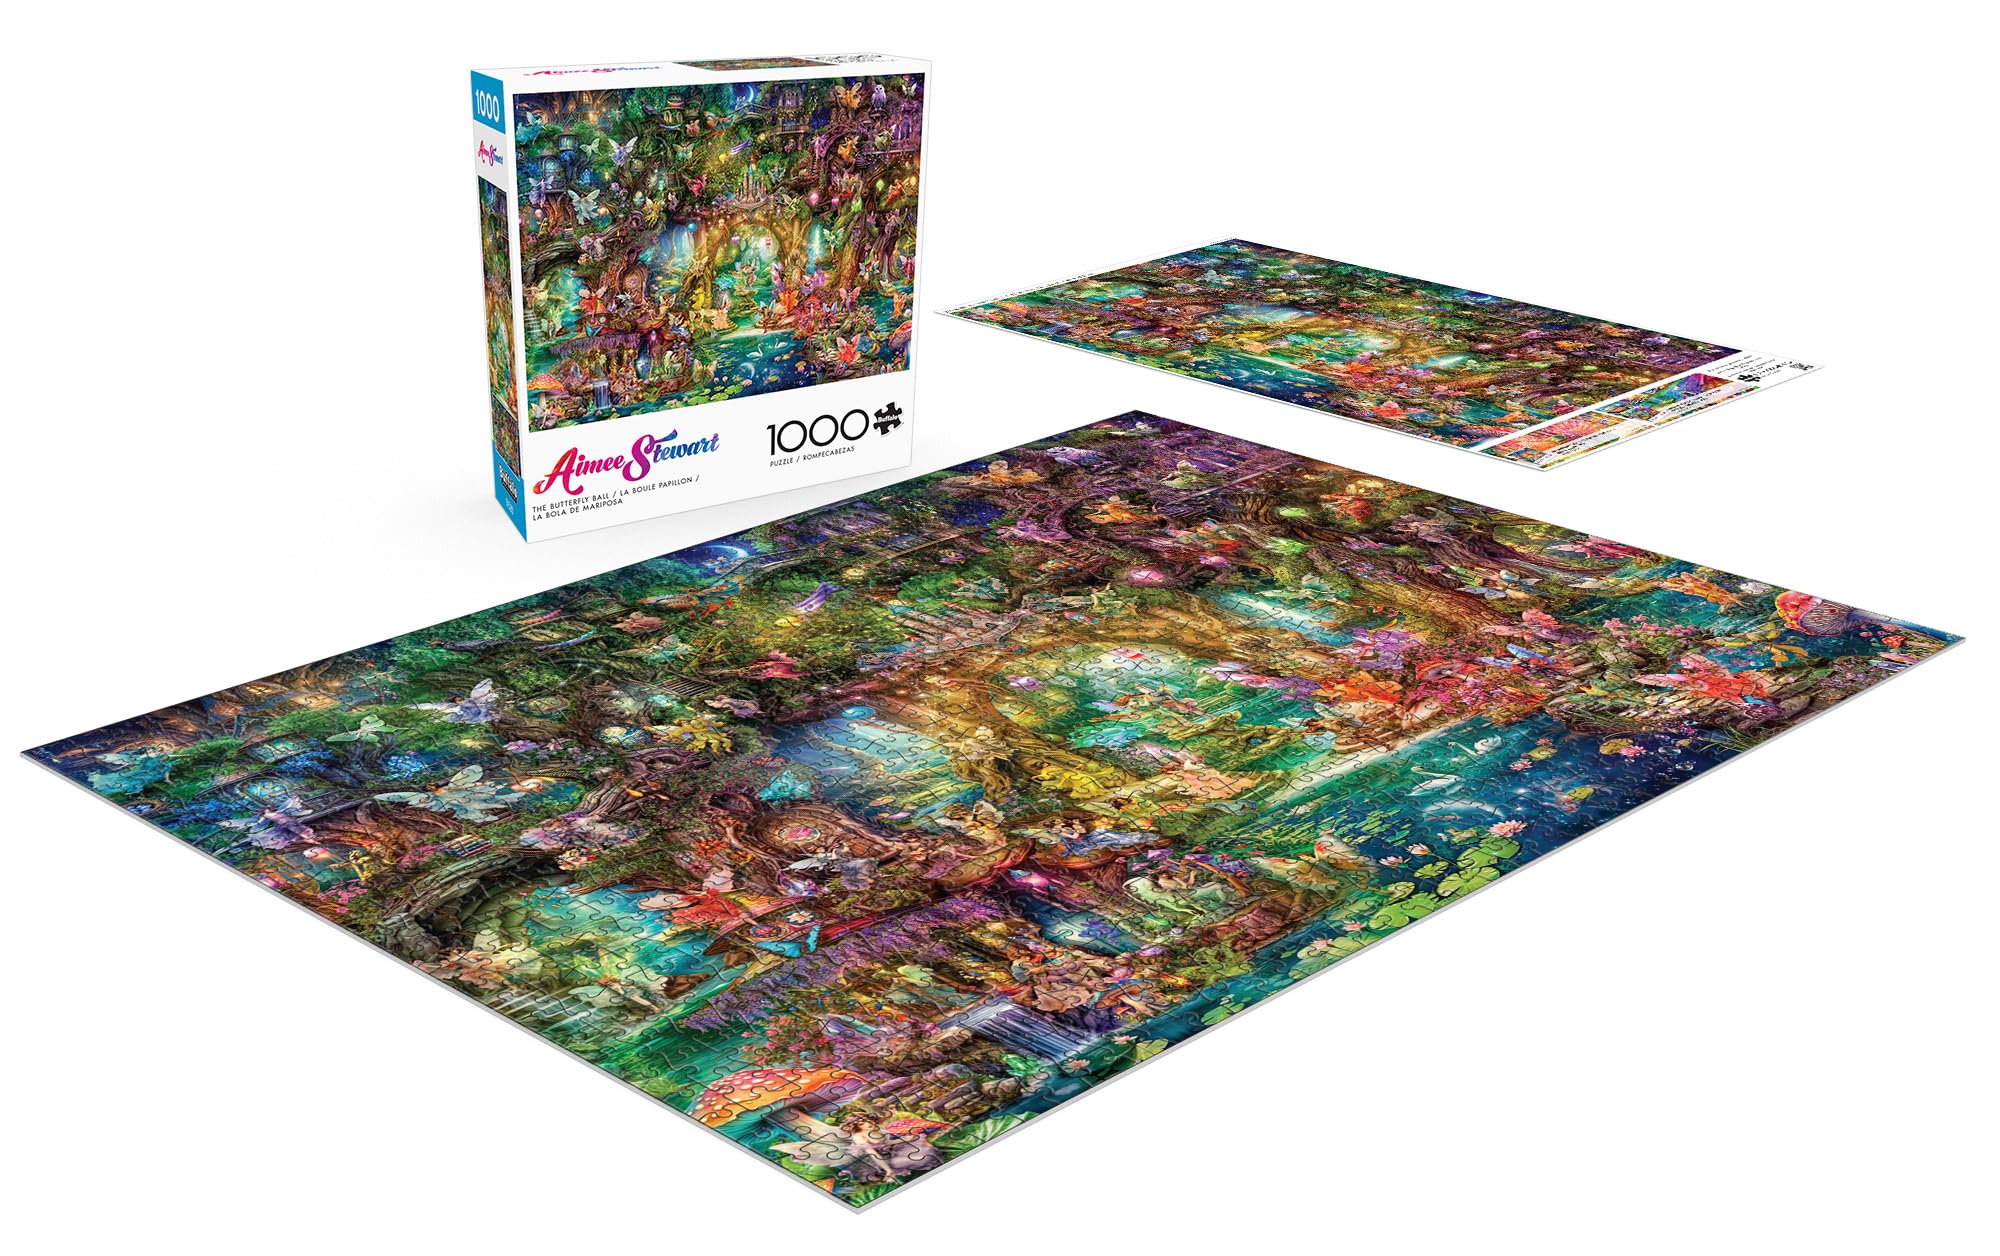 Buffalo Games - Aimee Stewart - The Butterfly Ball - 1000 Piece Jigsaw Puzzle for Adults Challenging Puzzle Perfect for Game Nights - Finished Size 26.75 x 19.75